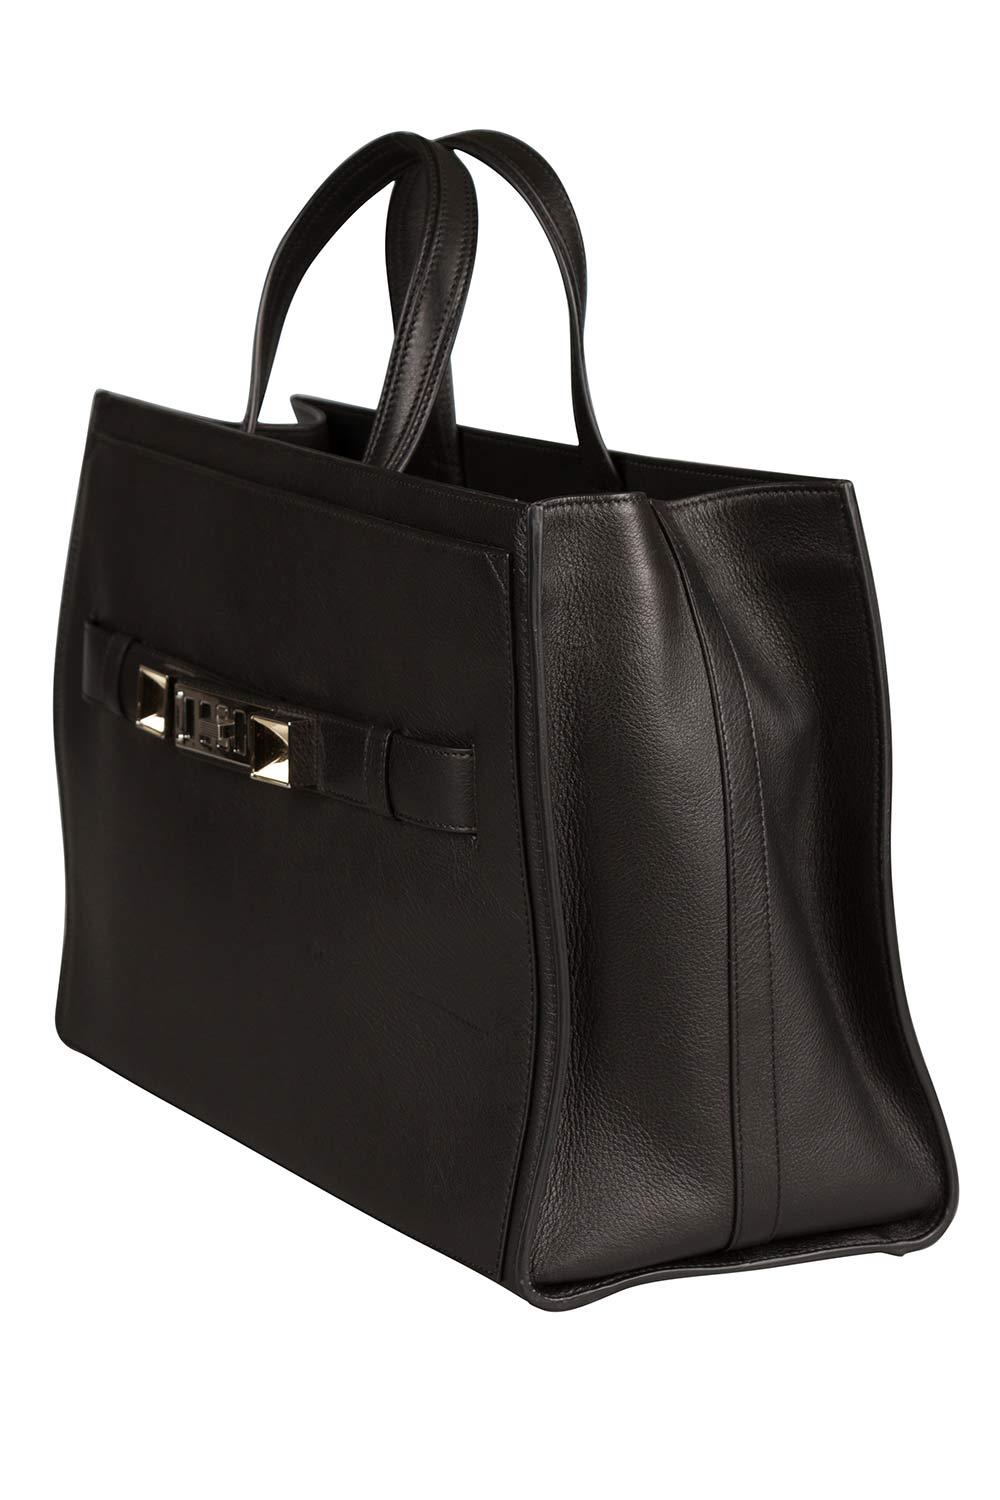 This PS11 tote by Proenza Schouler has a sophisticated look. Crafted from leather, it is held by two top handles. The top zipper opens to a spacious fabric interior and the bag is complete with a front silver-tone hardware detail. Team this fabulous